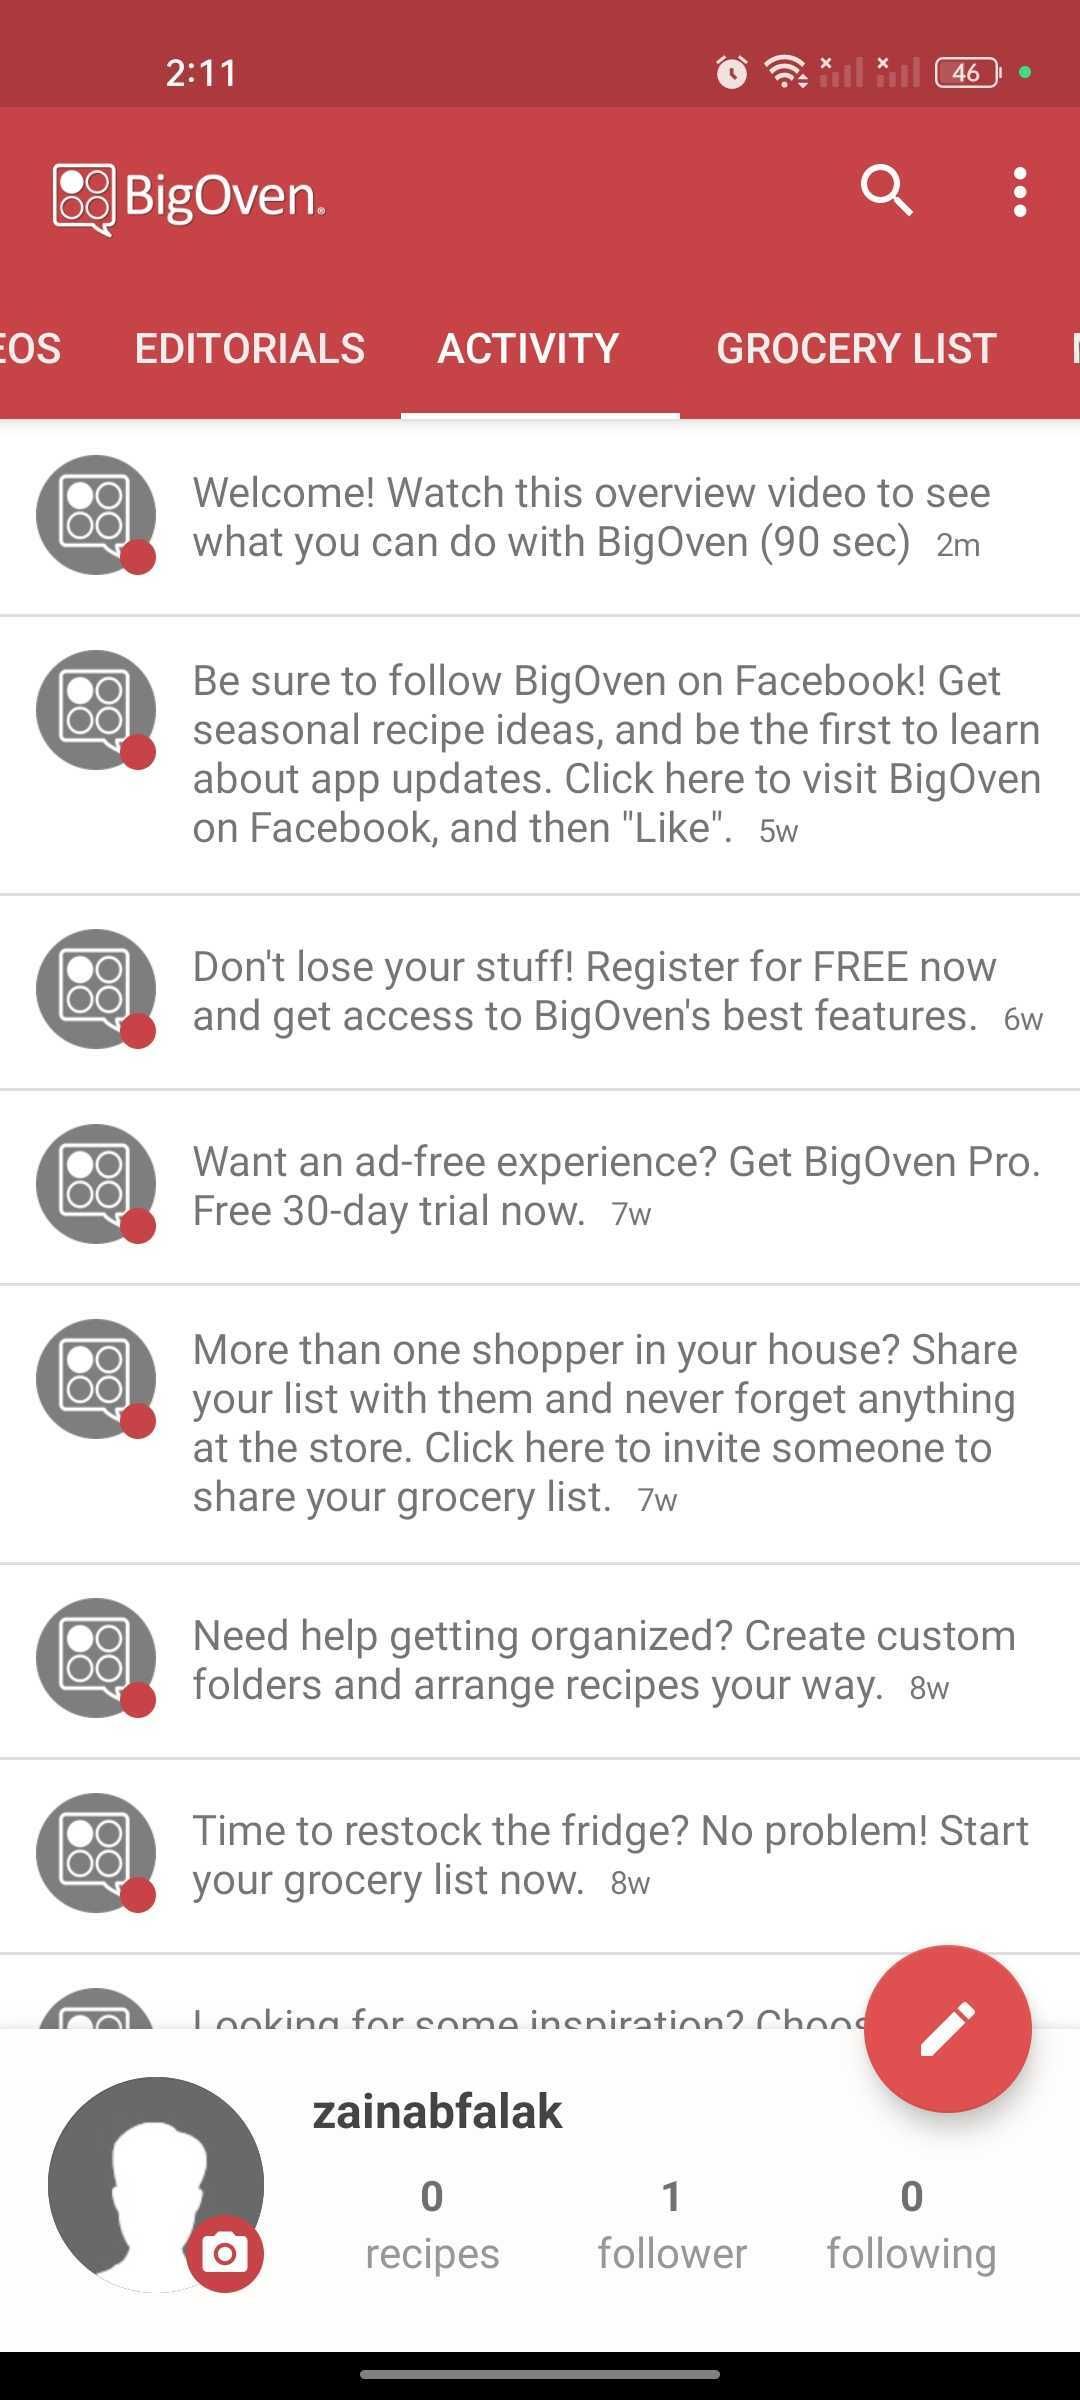 Activity section in the BigOven app